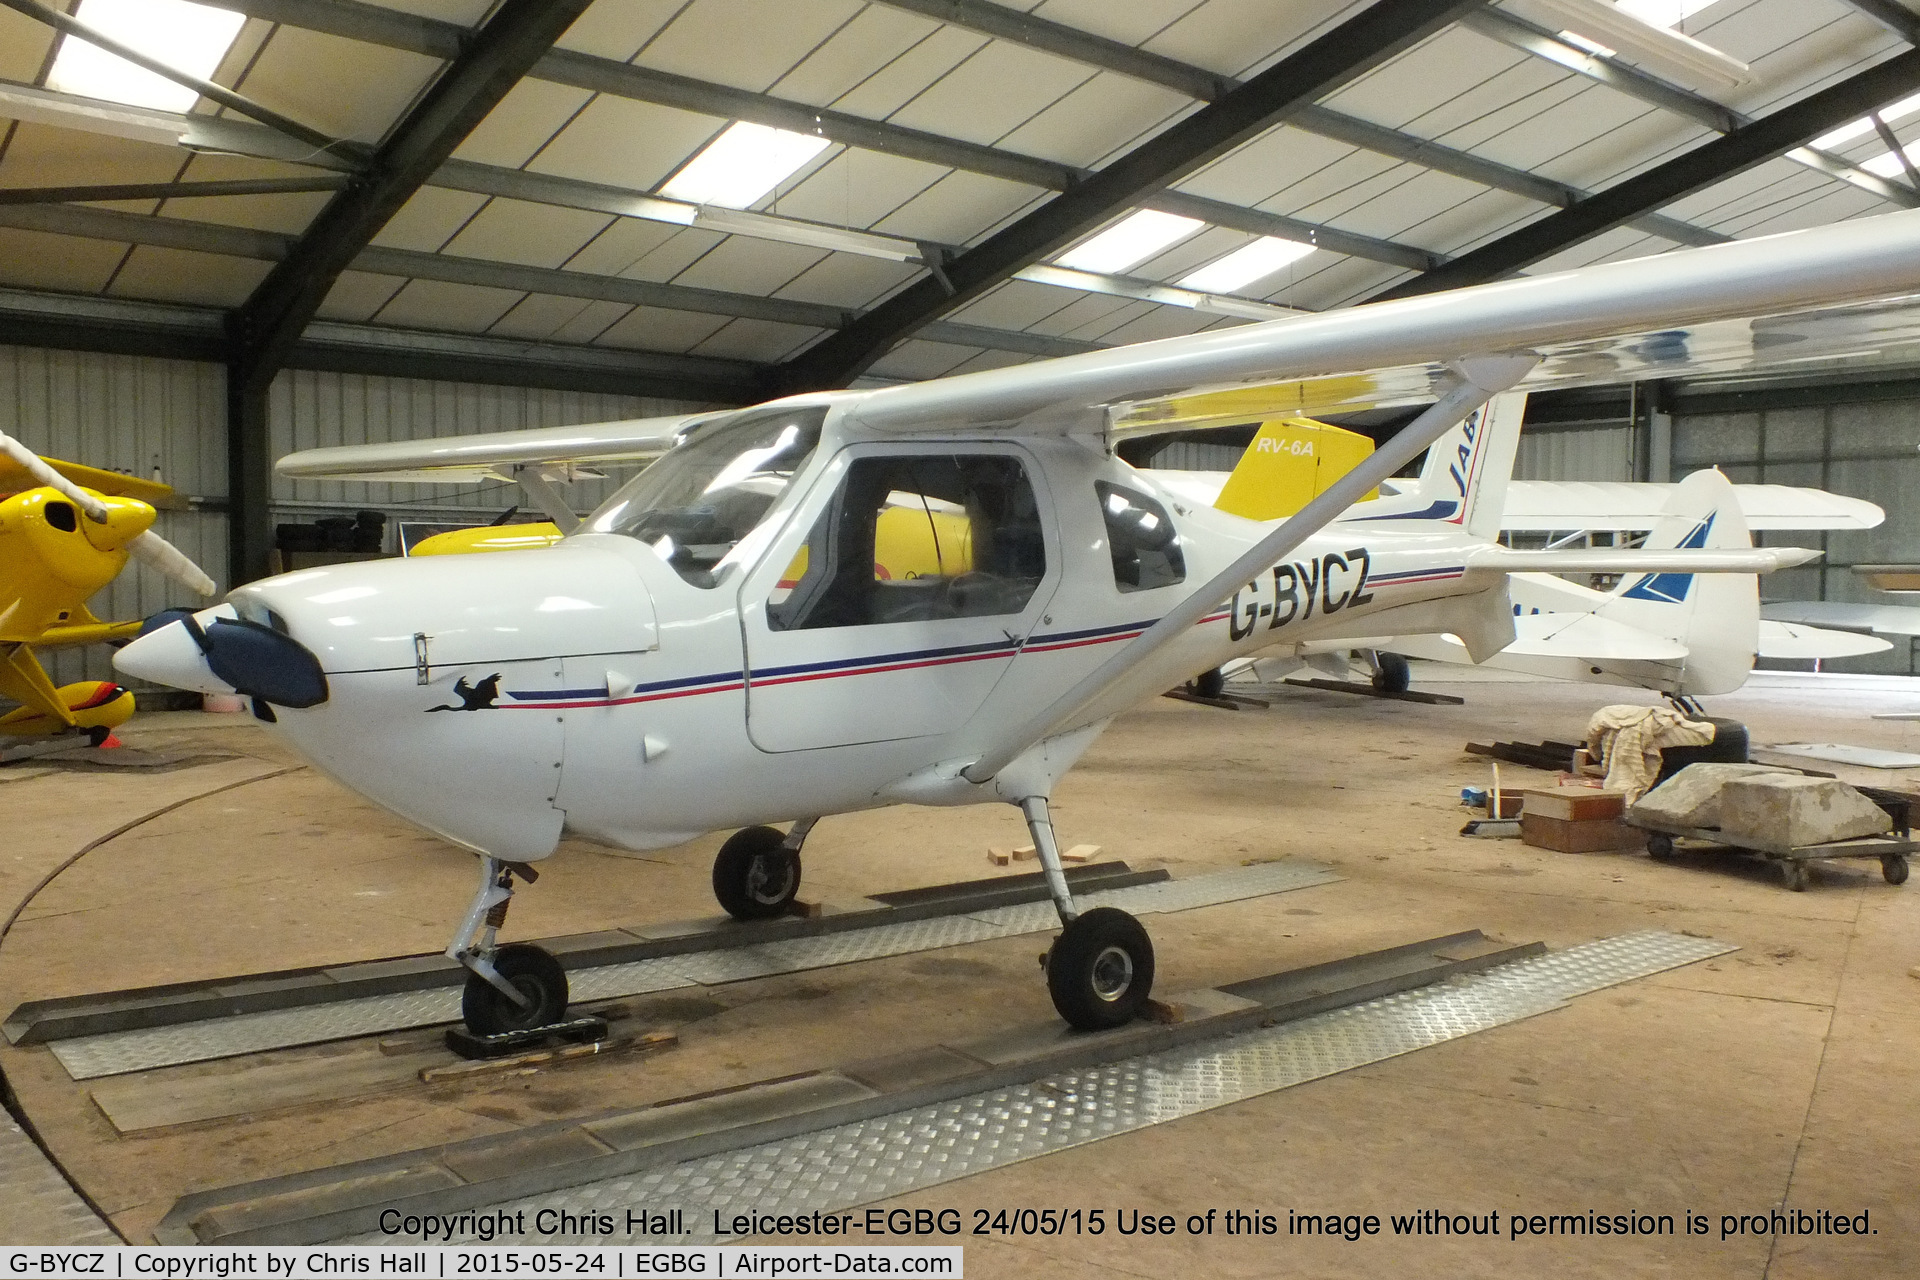 G-BYCZ, 1998 Jabiru SK C/N PFA 274-13388, in the turntable hangar at Leicester